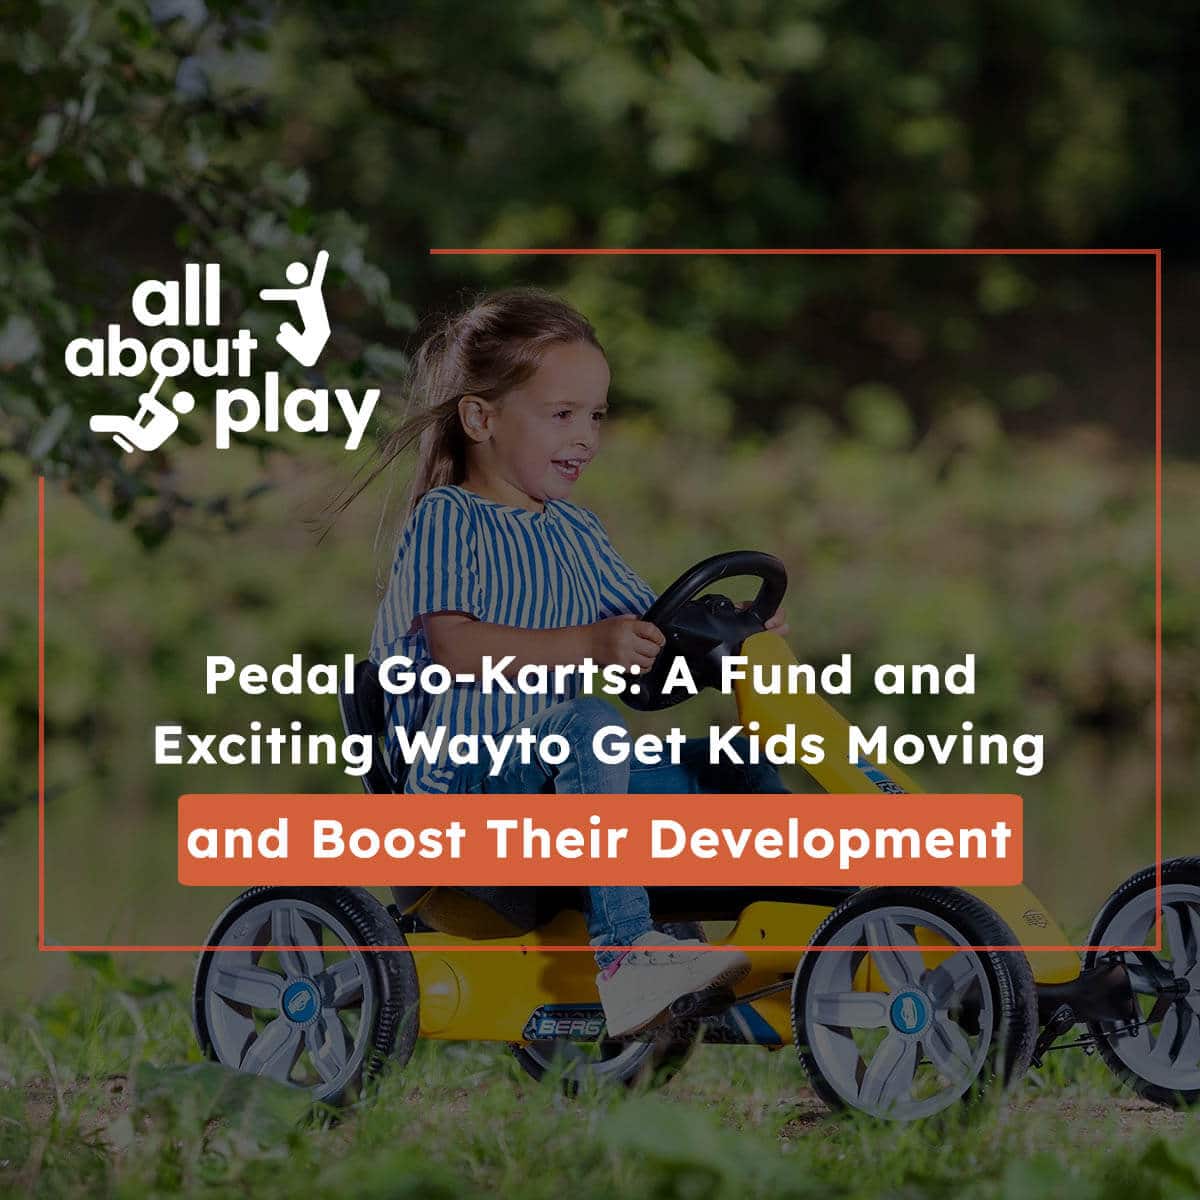 Pedal Go-Karts – Get Kids Moving and Boost Their Development